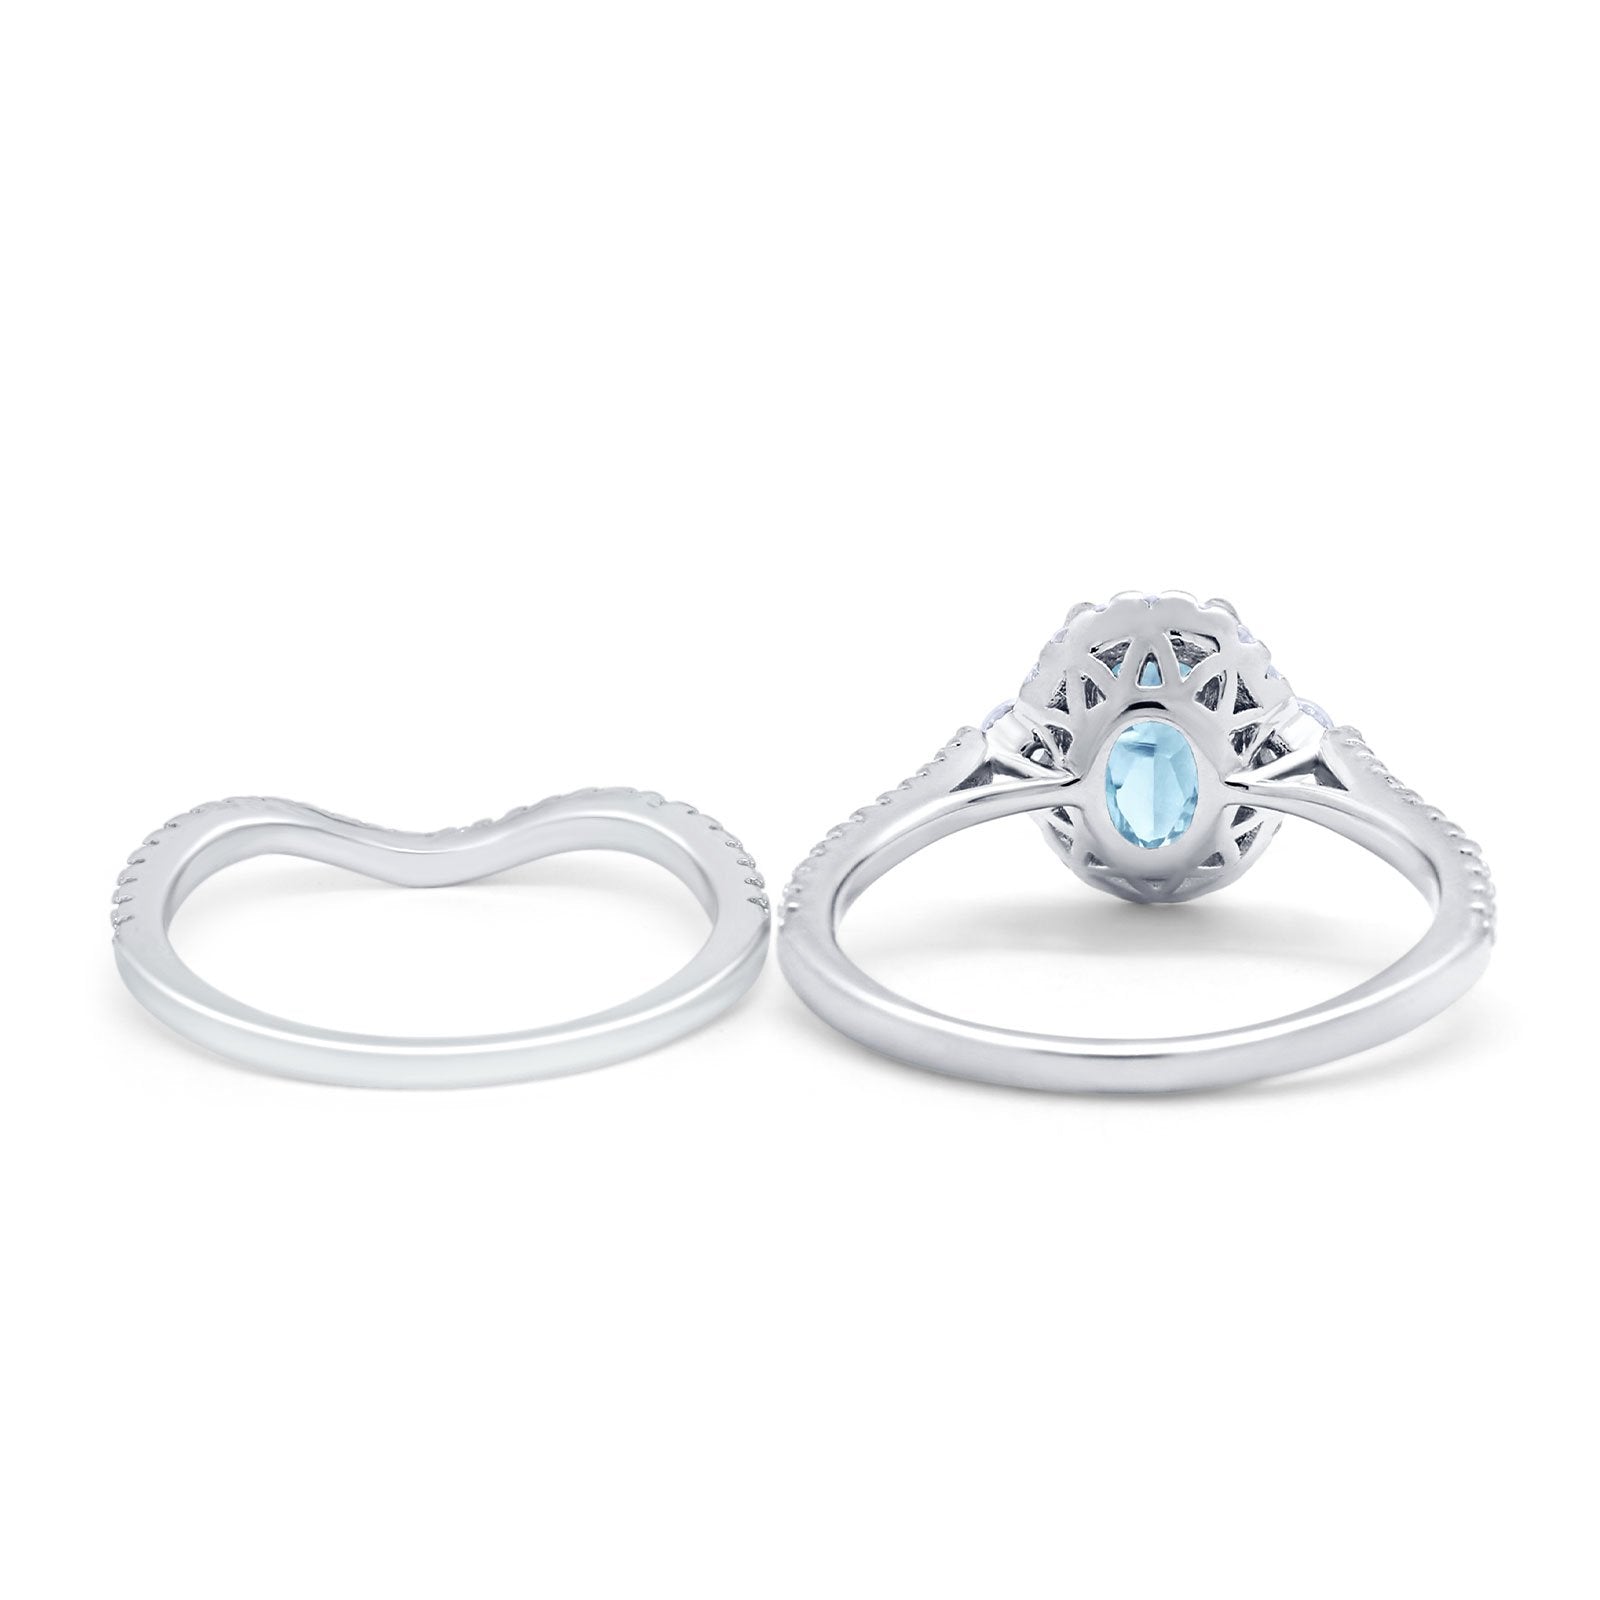 Oval Two Piece Halo Bridal Set Ring Simulated Aquamarine CZ 925 Sterling Silver